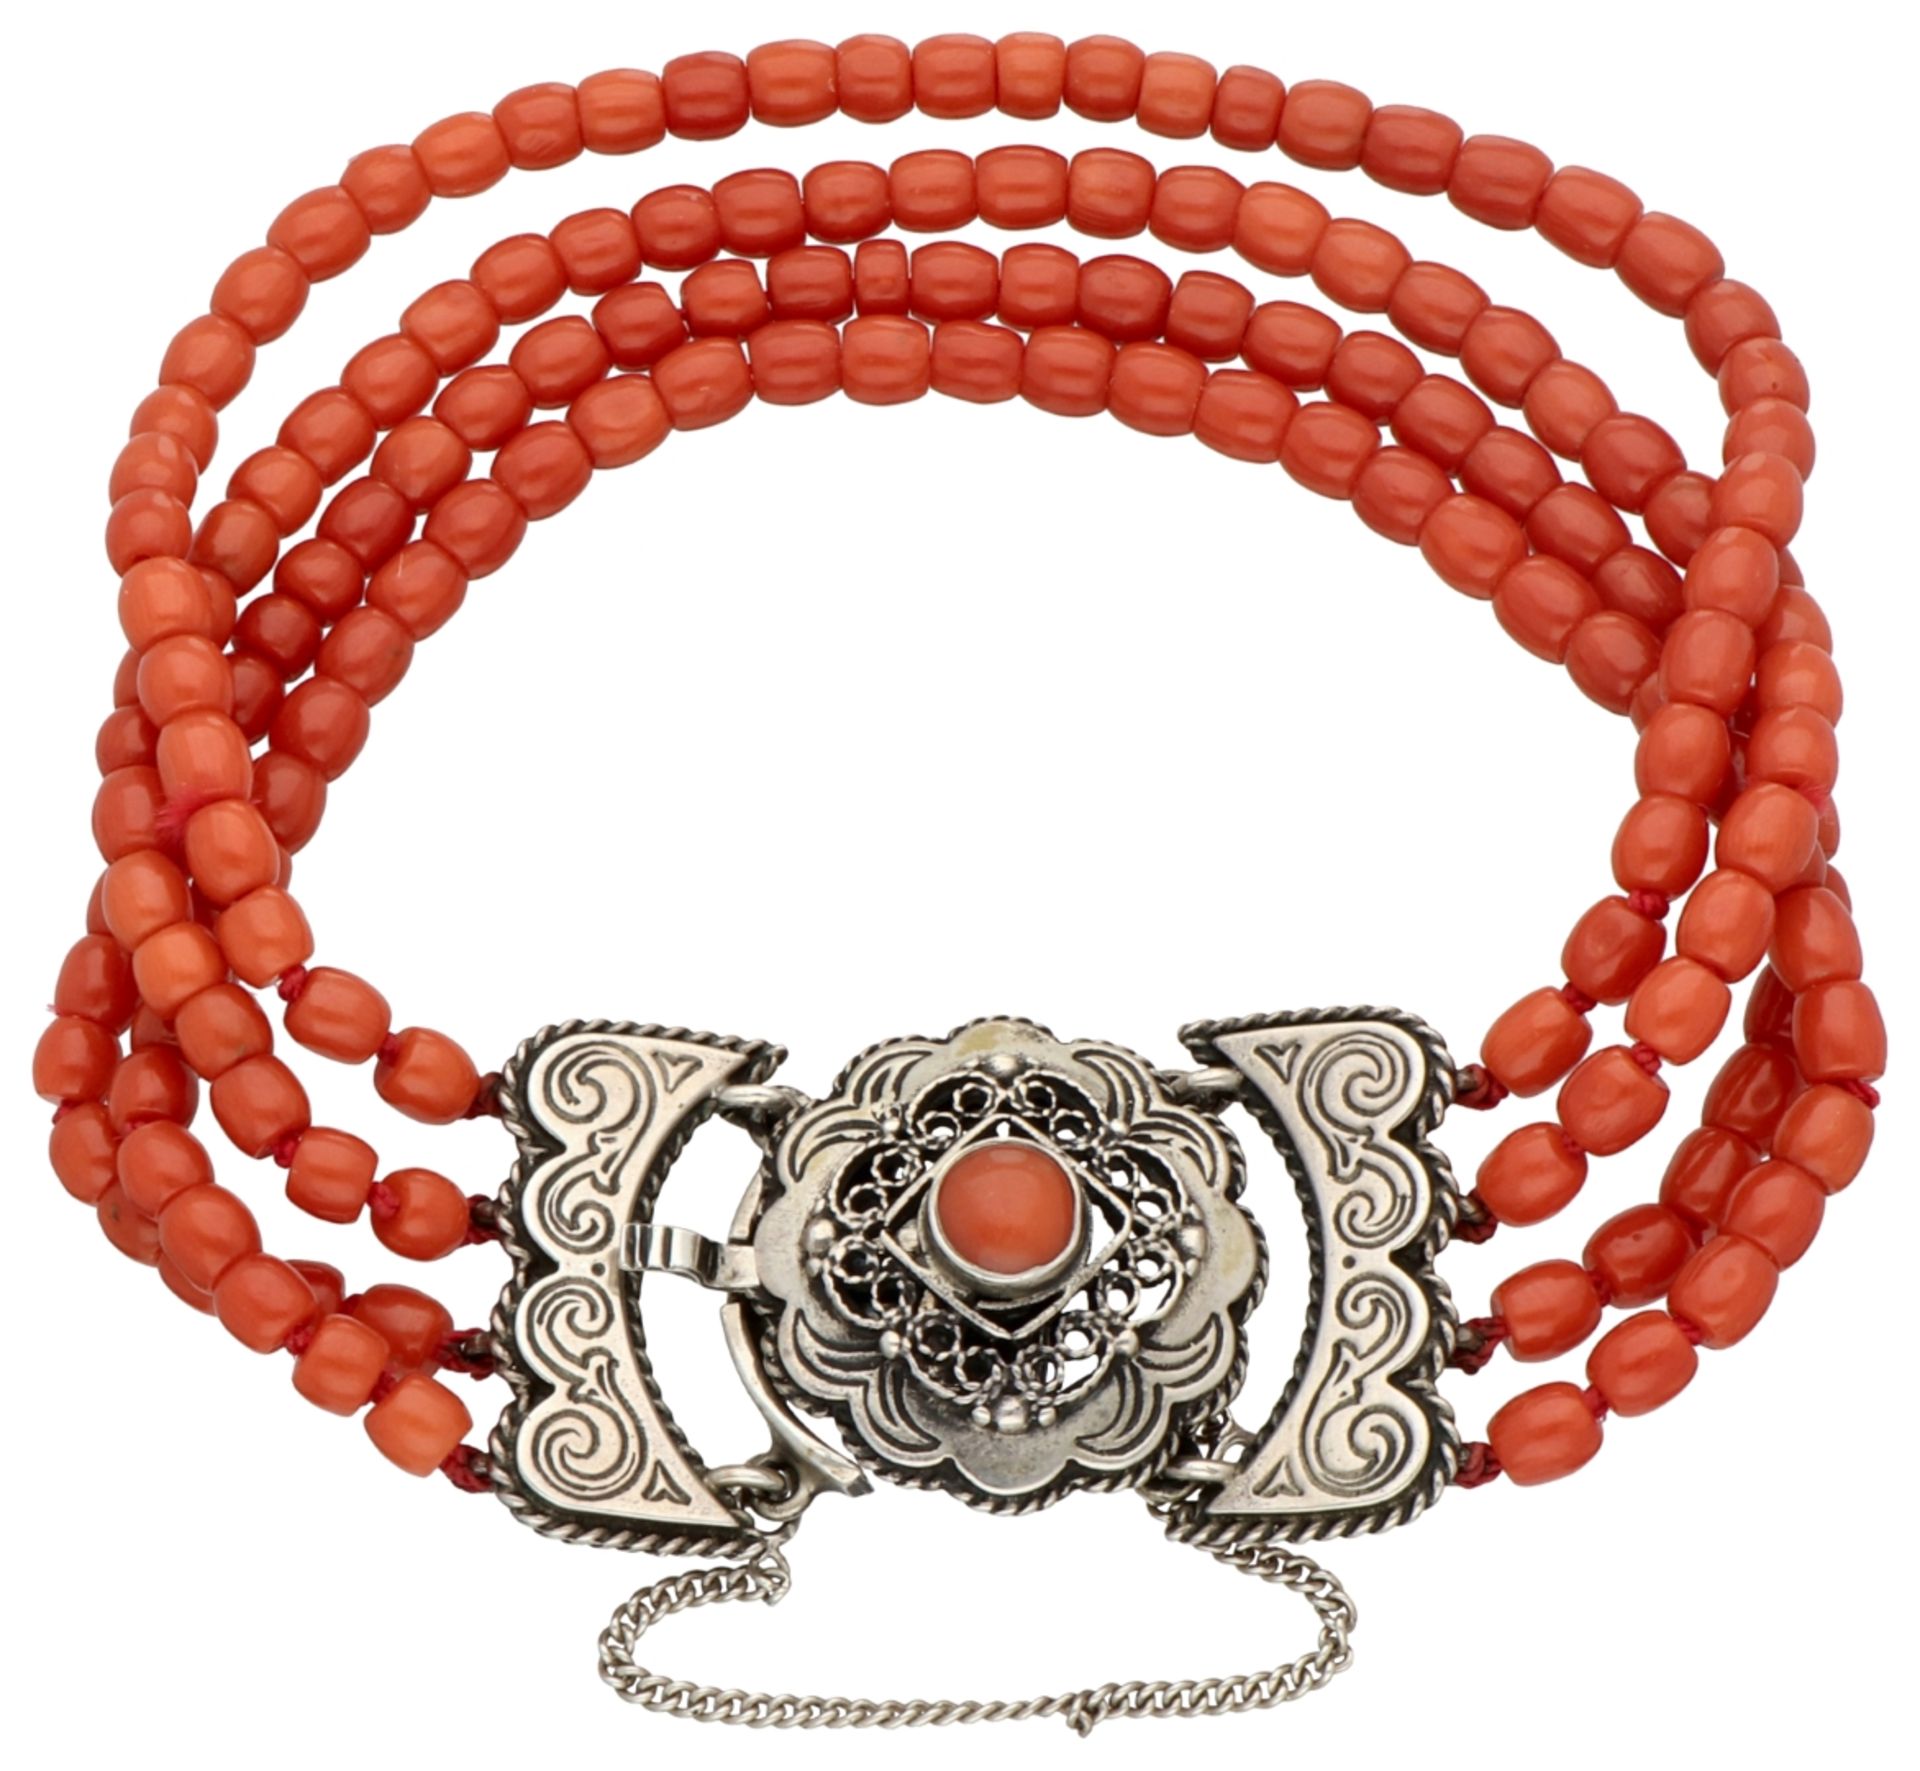 No Reserve - Four-row red coral bracelet with silver clasp.